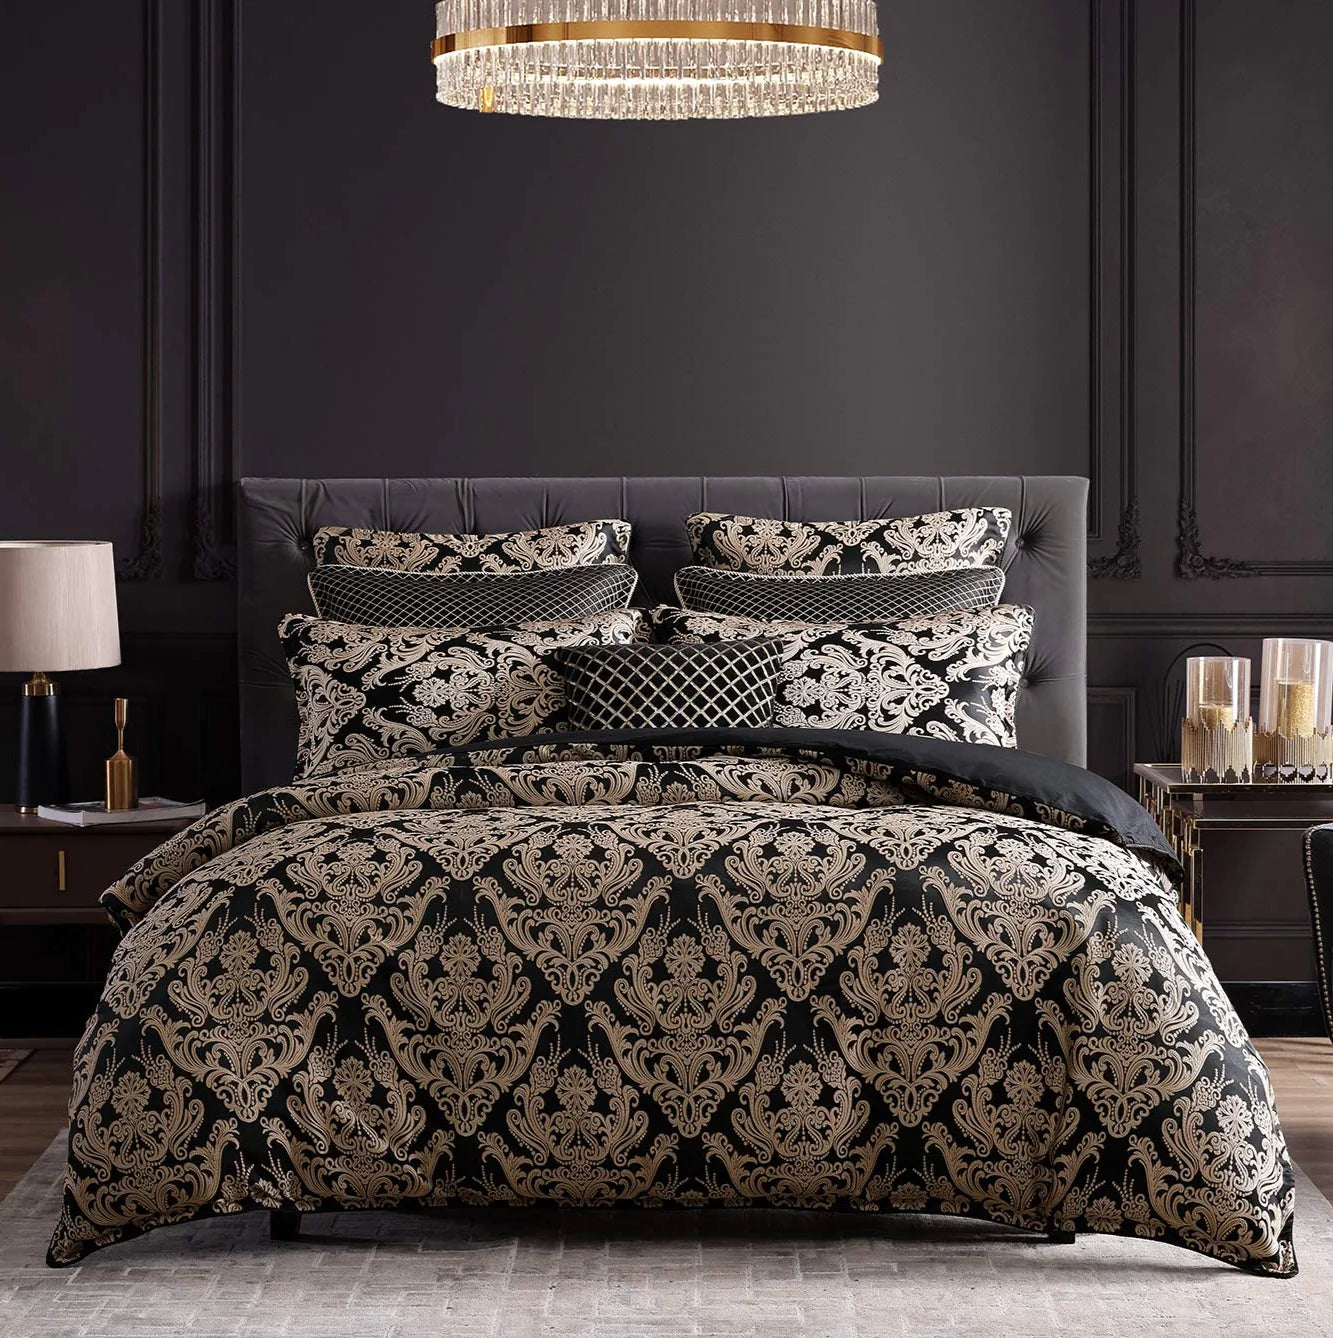 This striking ensemble design is embellished with captivating Italian-inspired motifs. Serving as the centerpiece of any master bedroom, Vercelli Noir is expertly crafted from a luxurious jacquard fabric in a stunning combination of black and gold.